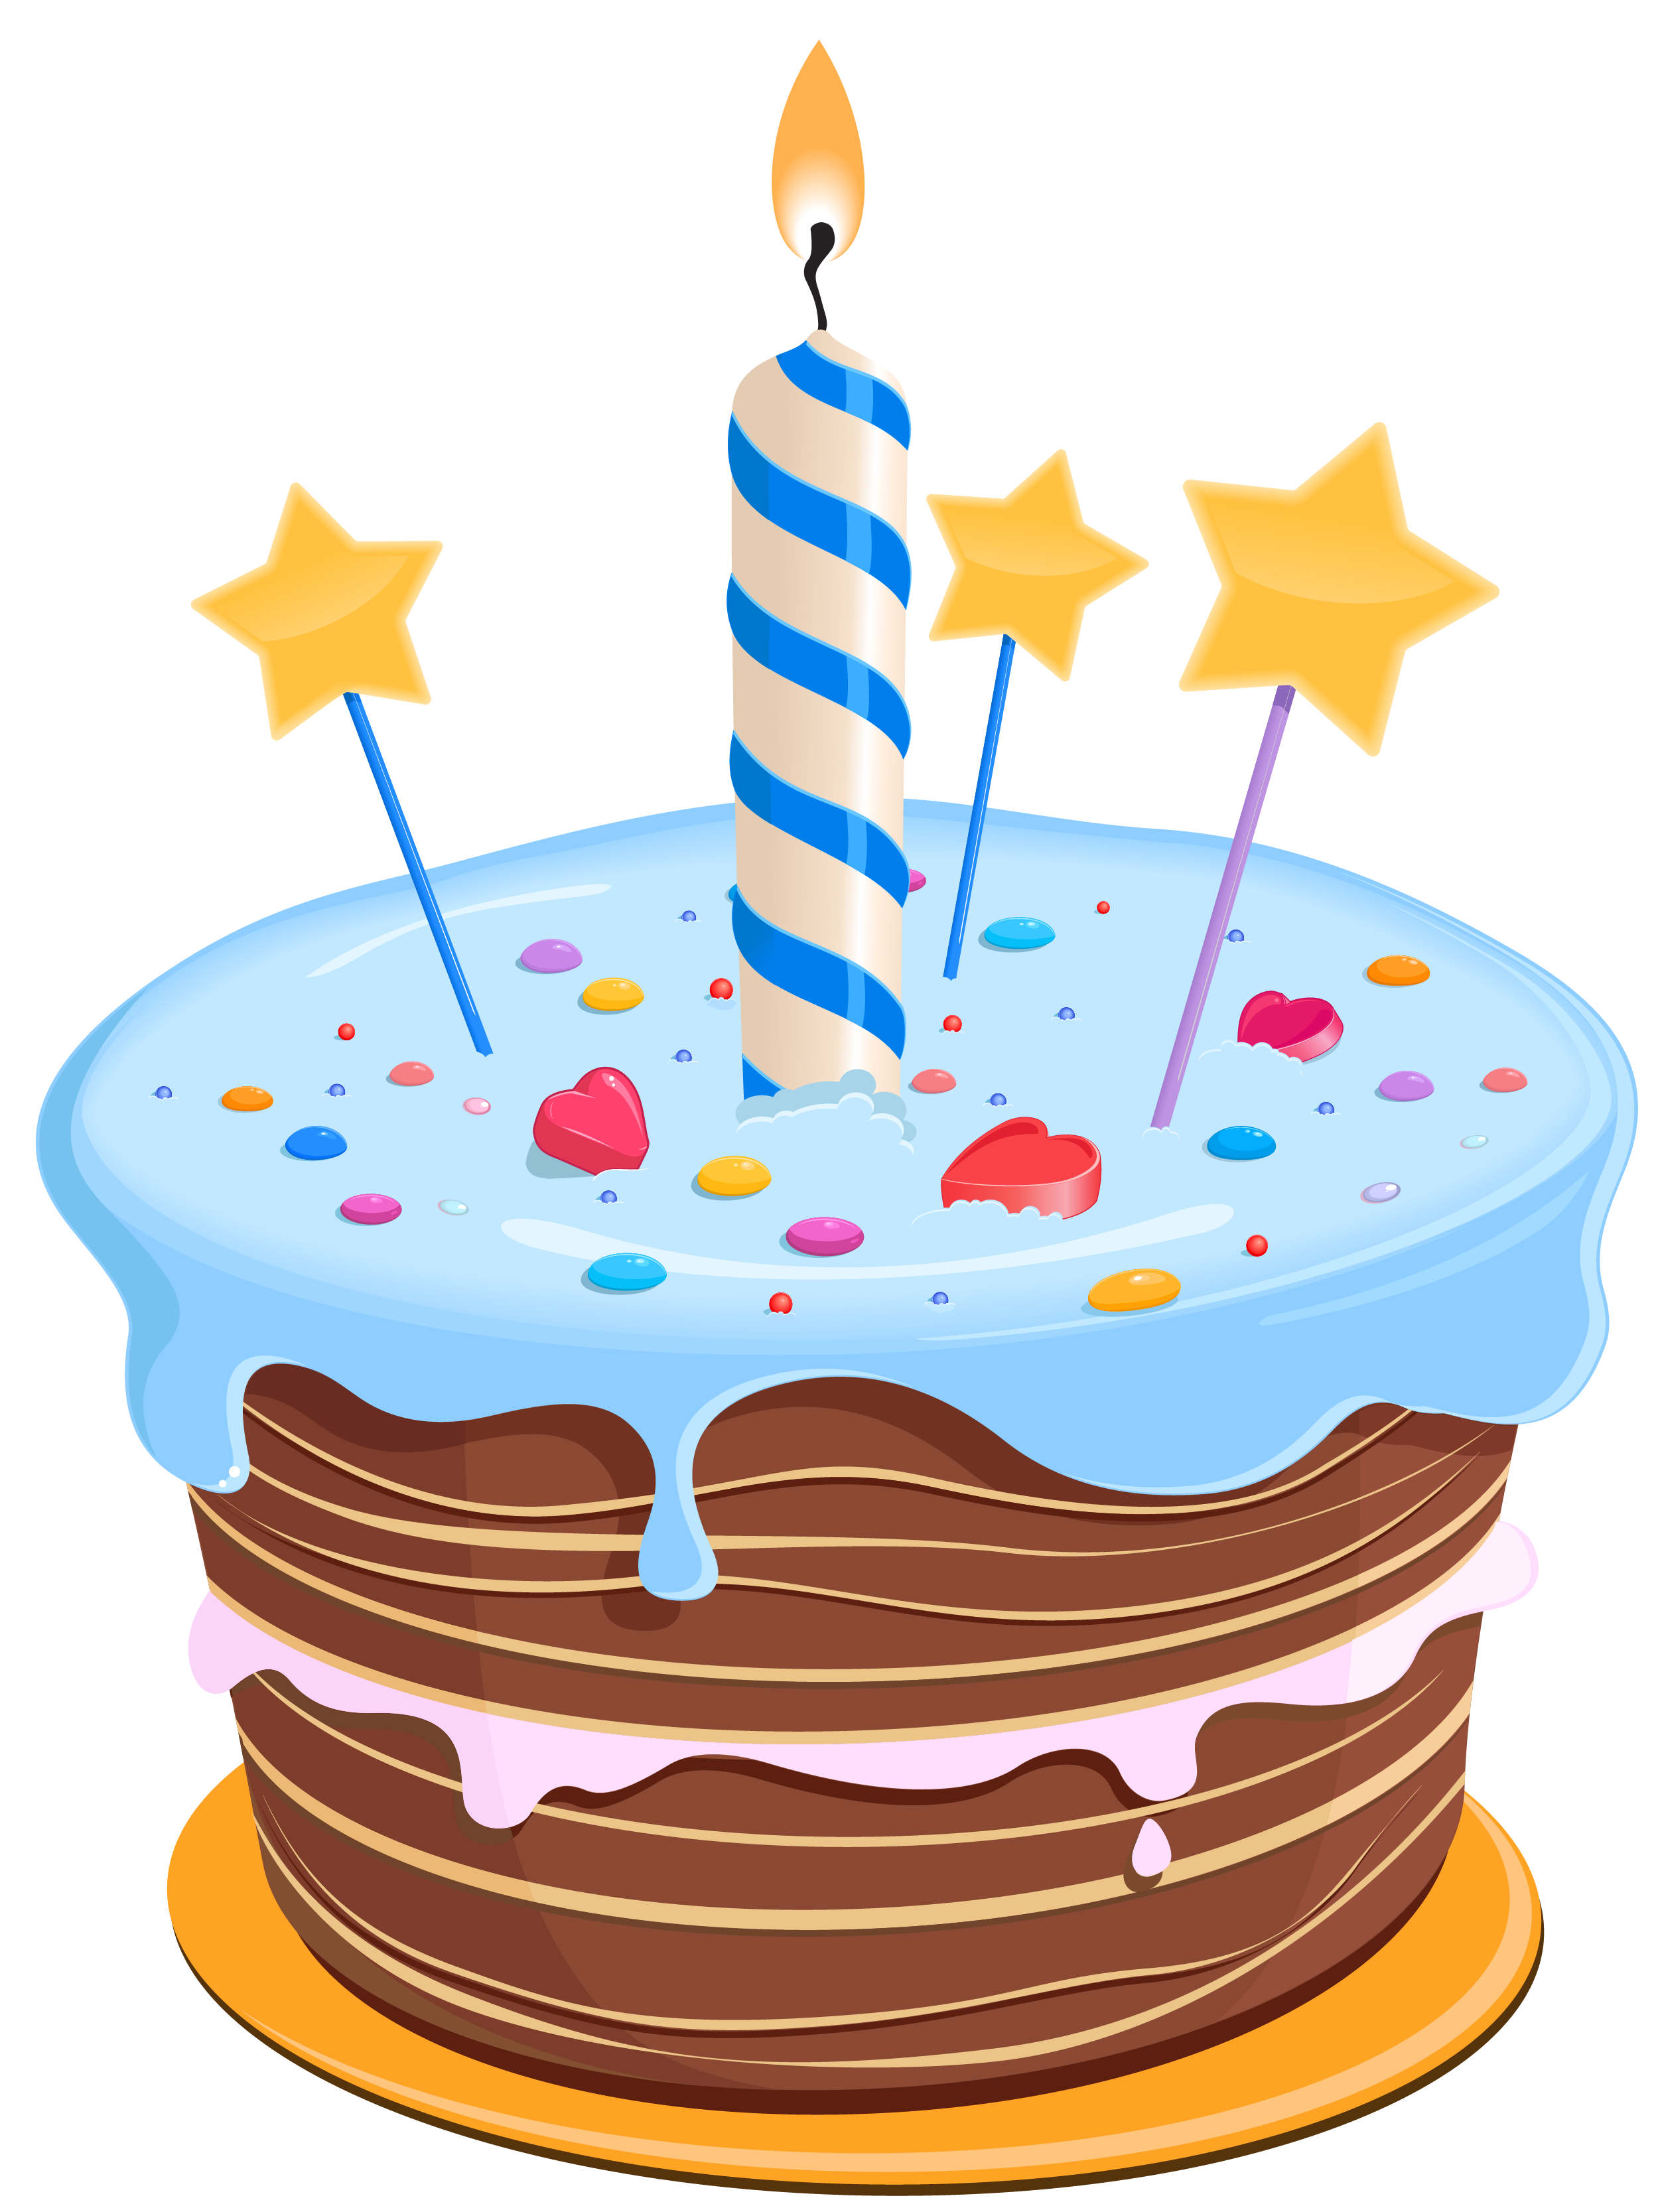 Birthday Cake Free Clipart Download - Birthday Cake Clip Art, HD Png  Download - 600x586(#5595727) - PngFind